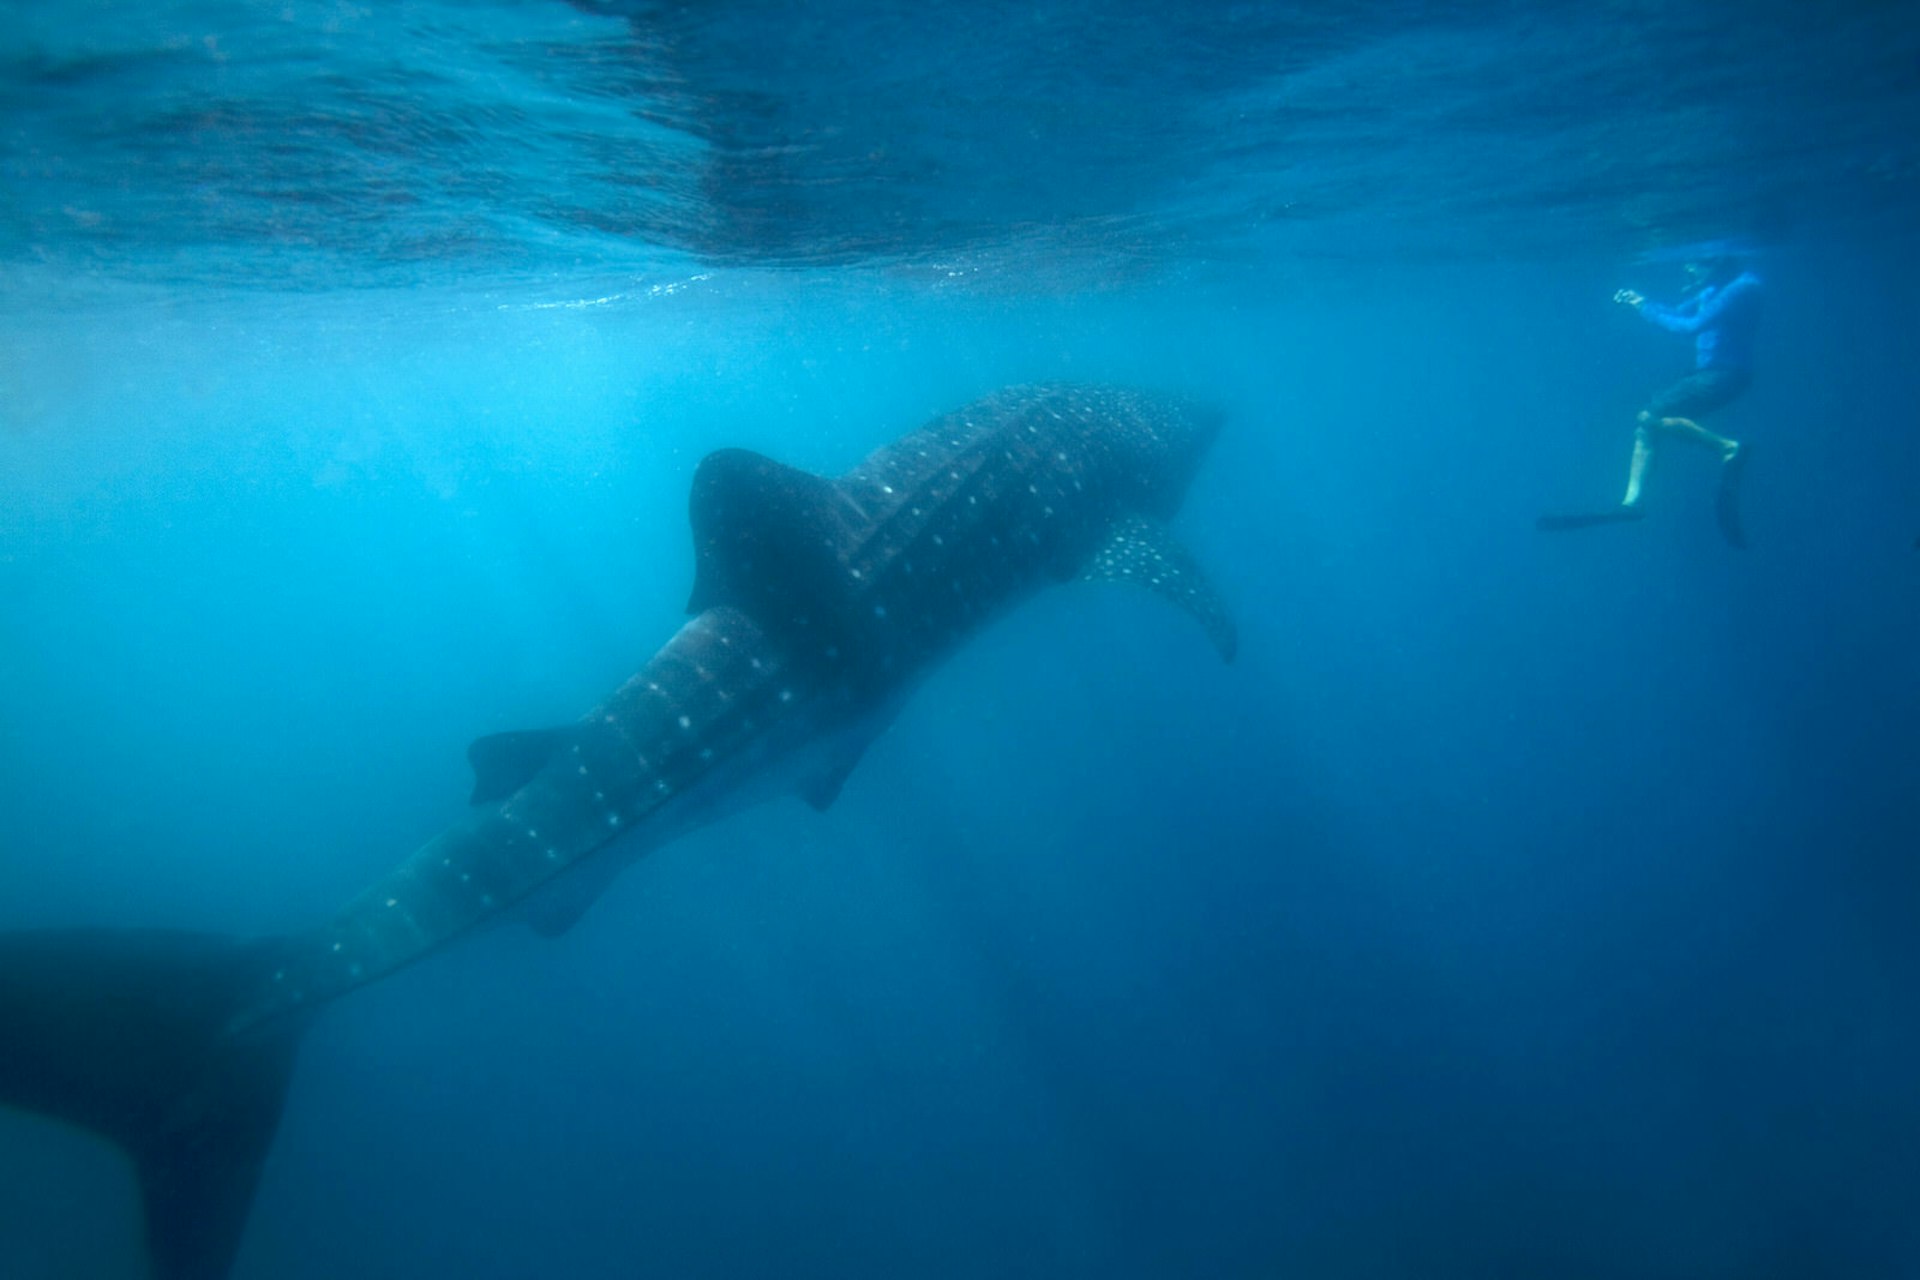 A snorkeler swimming near a large whale shark in the waters near Tofo